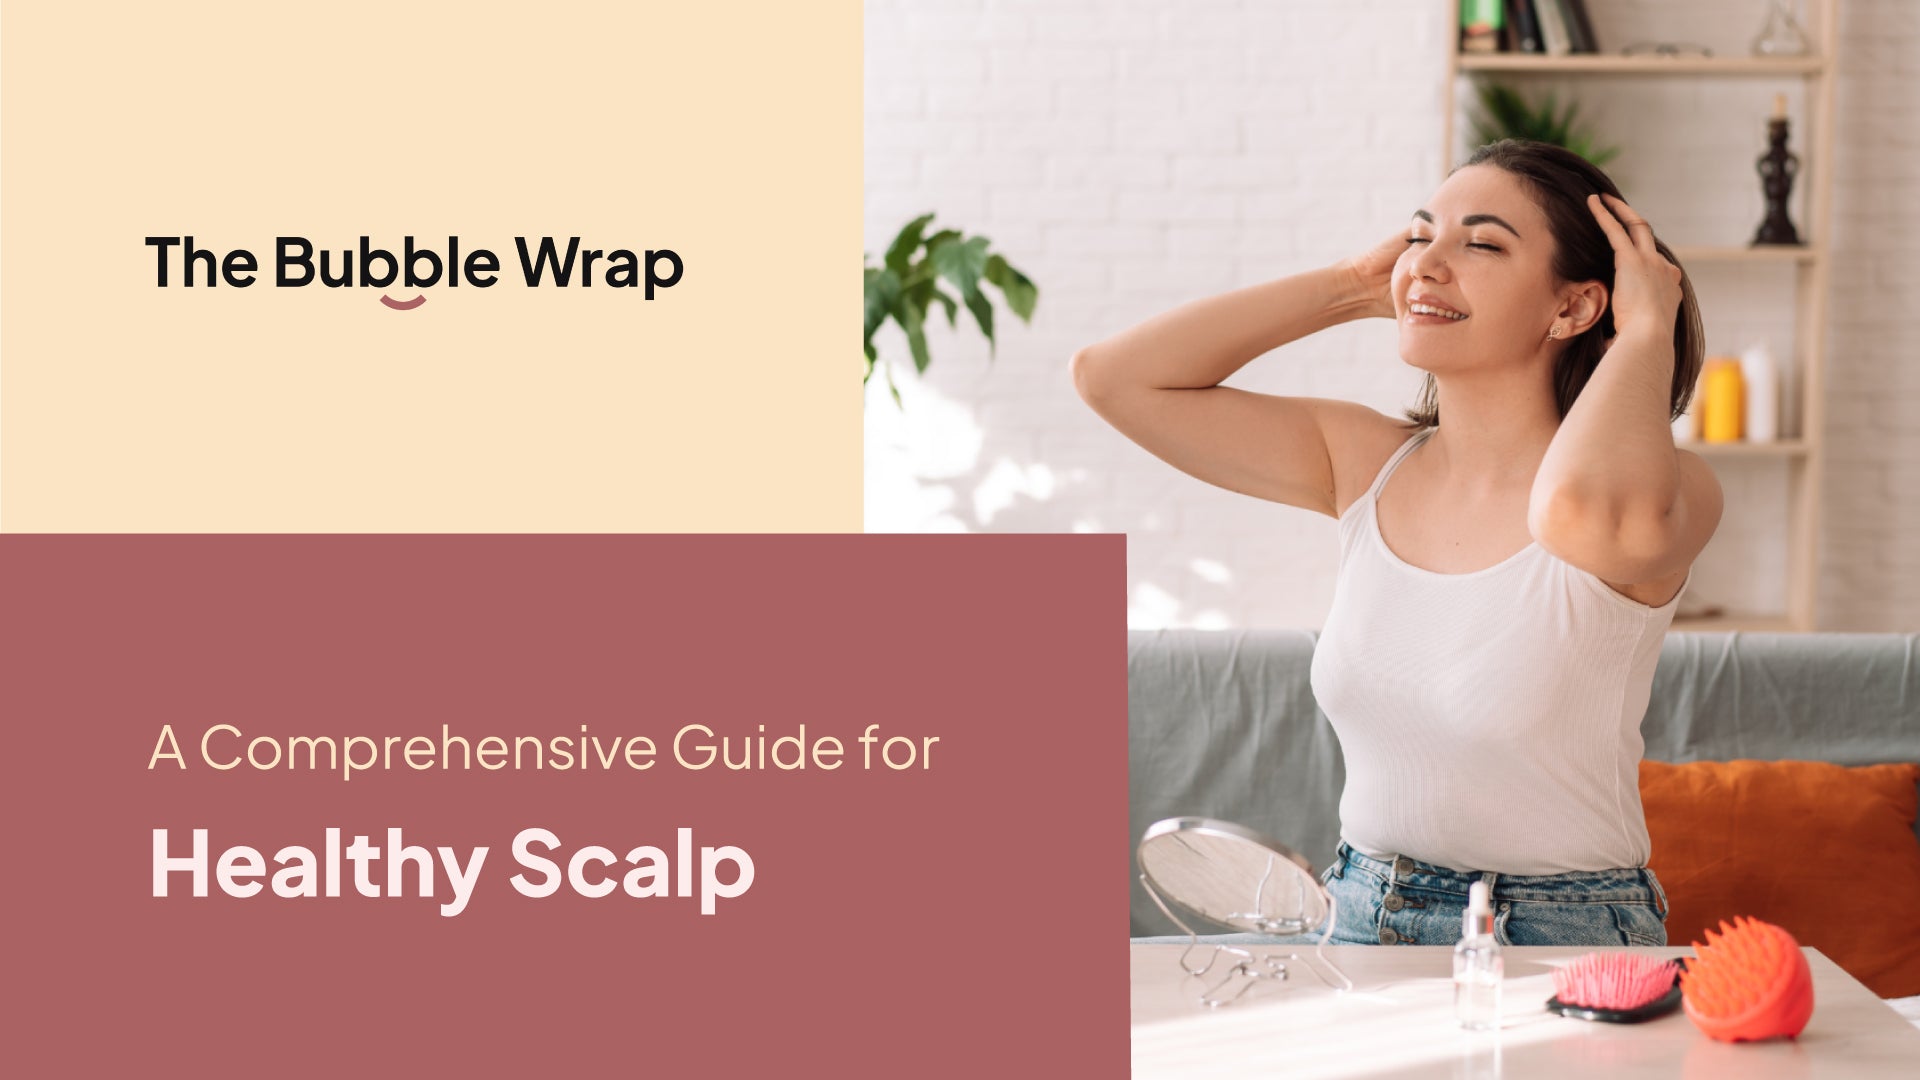 A Comprehensive Guide for Healthy Scalp.